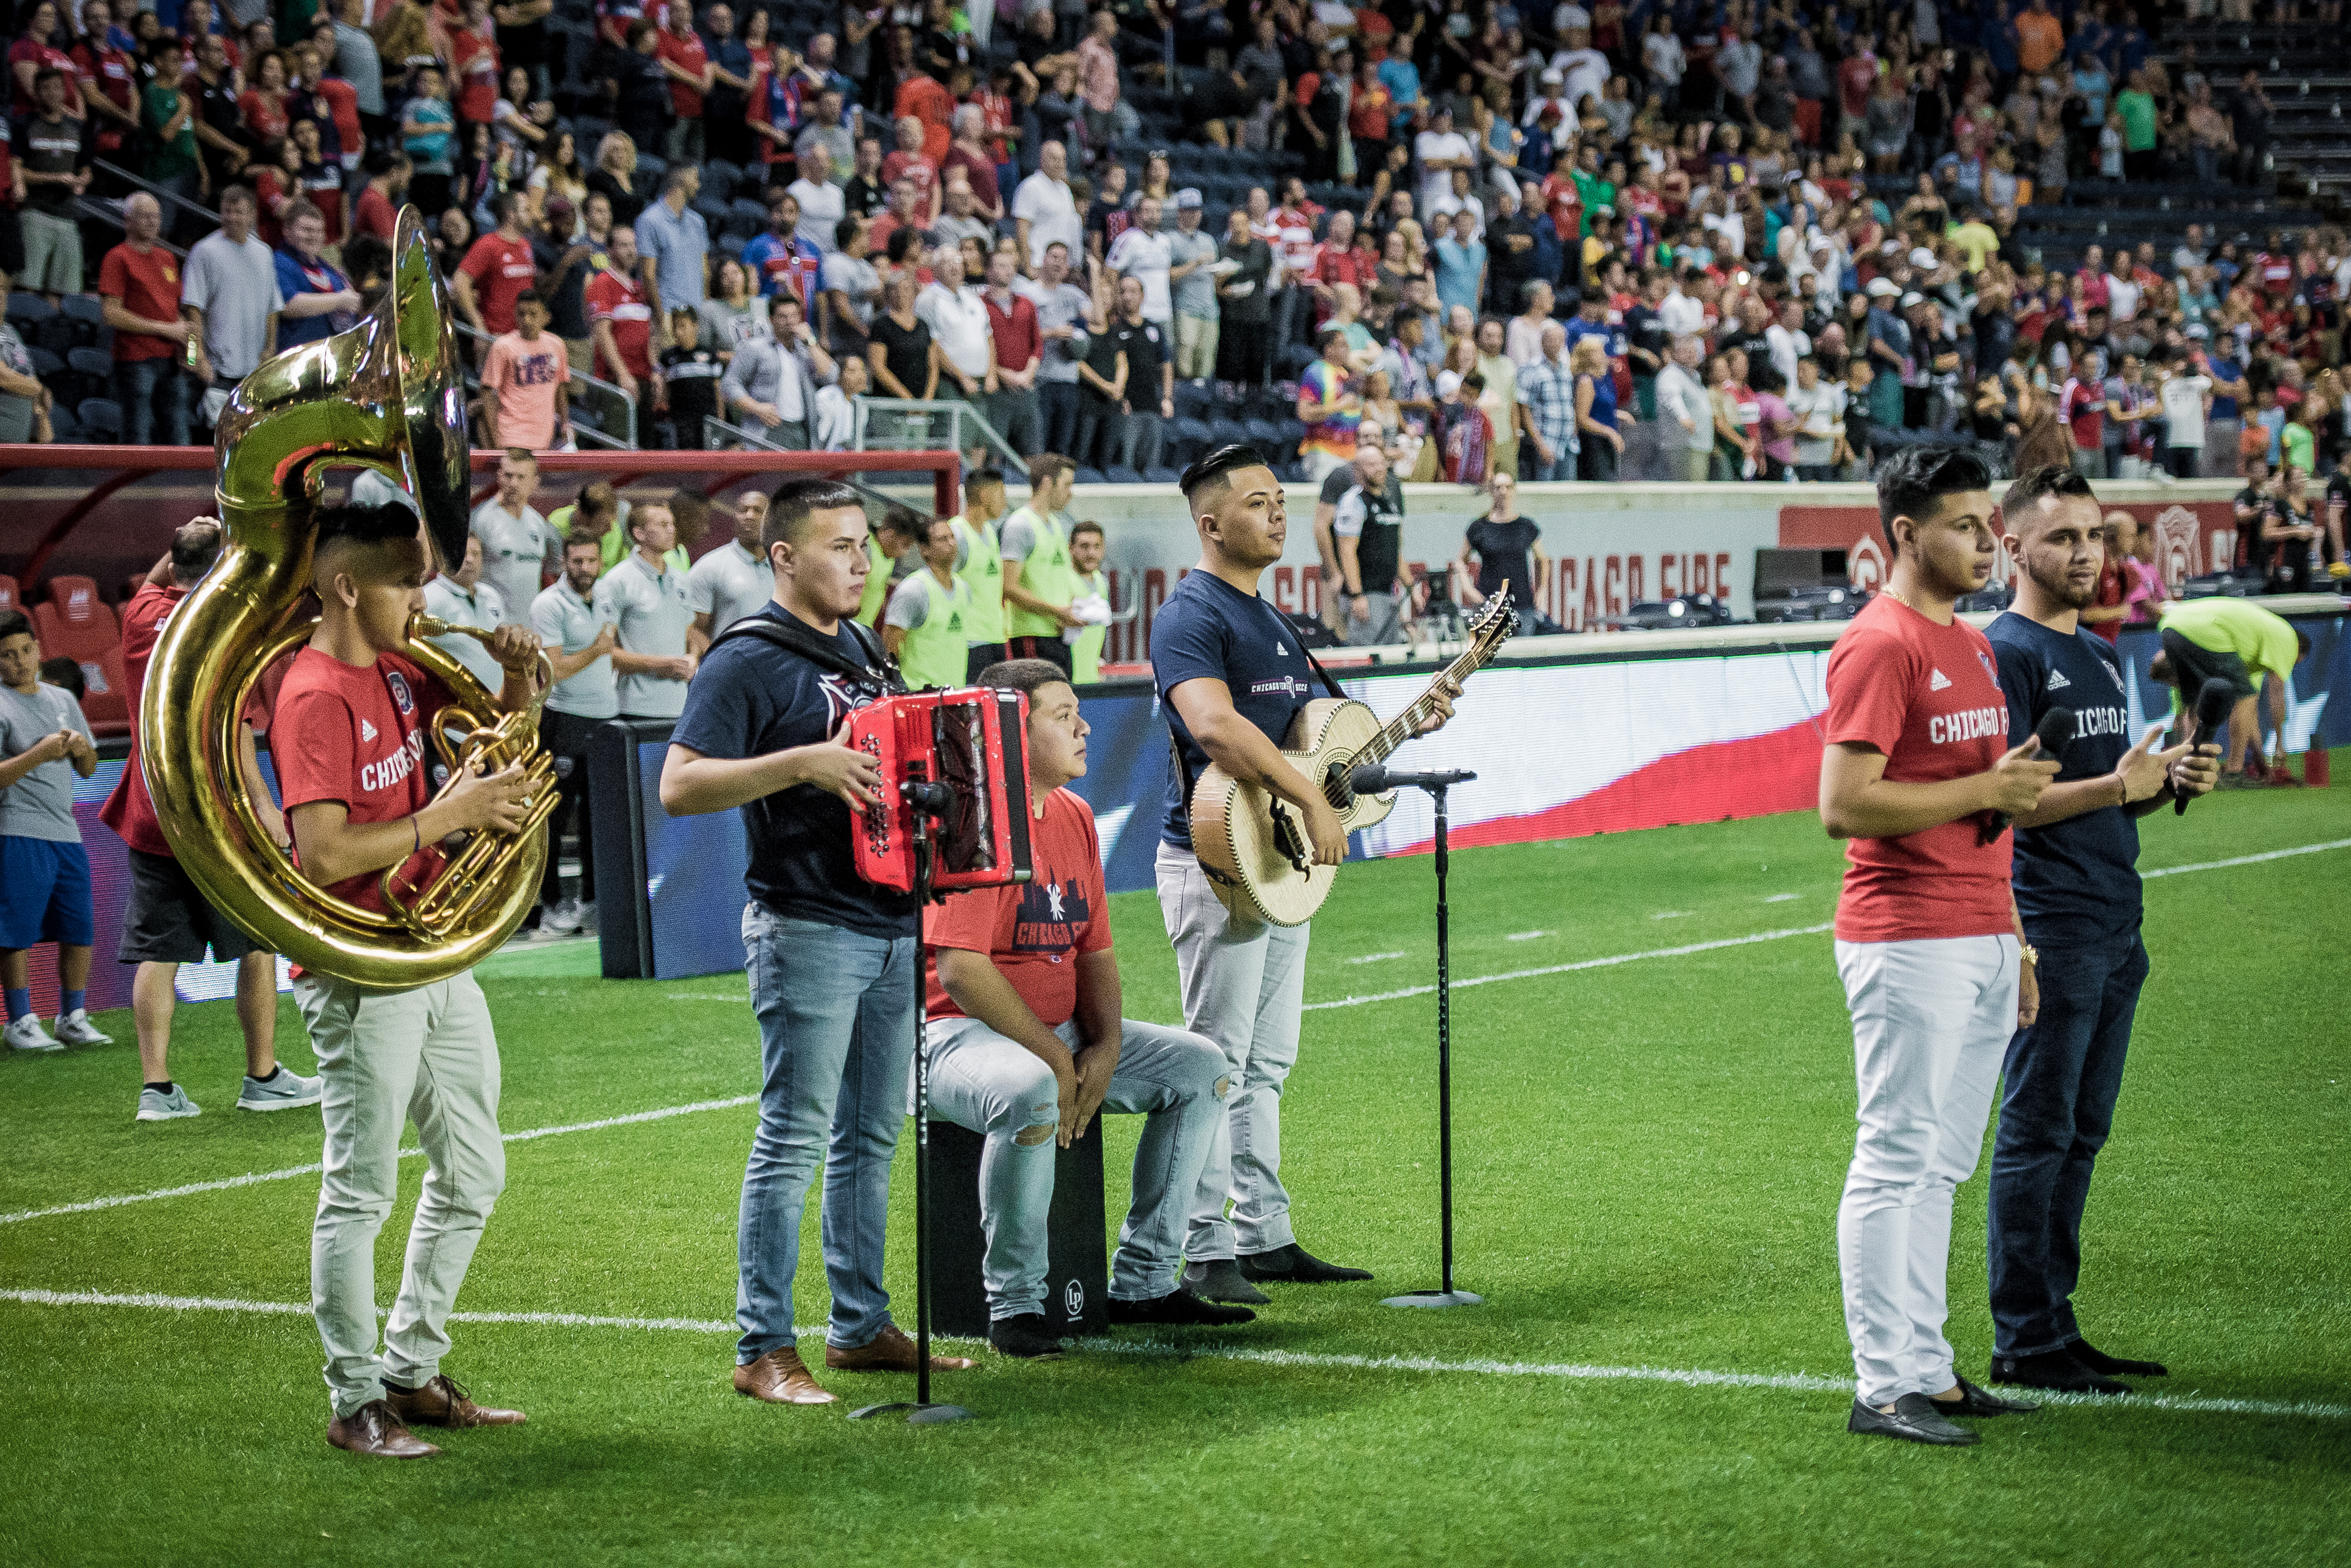 Student Performance at Toyota Park